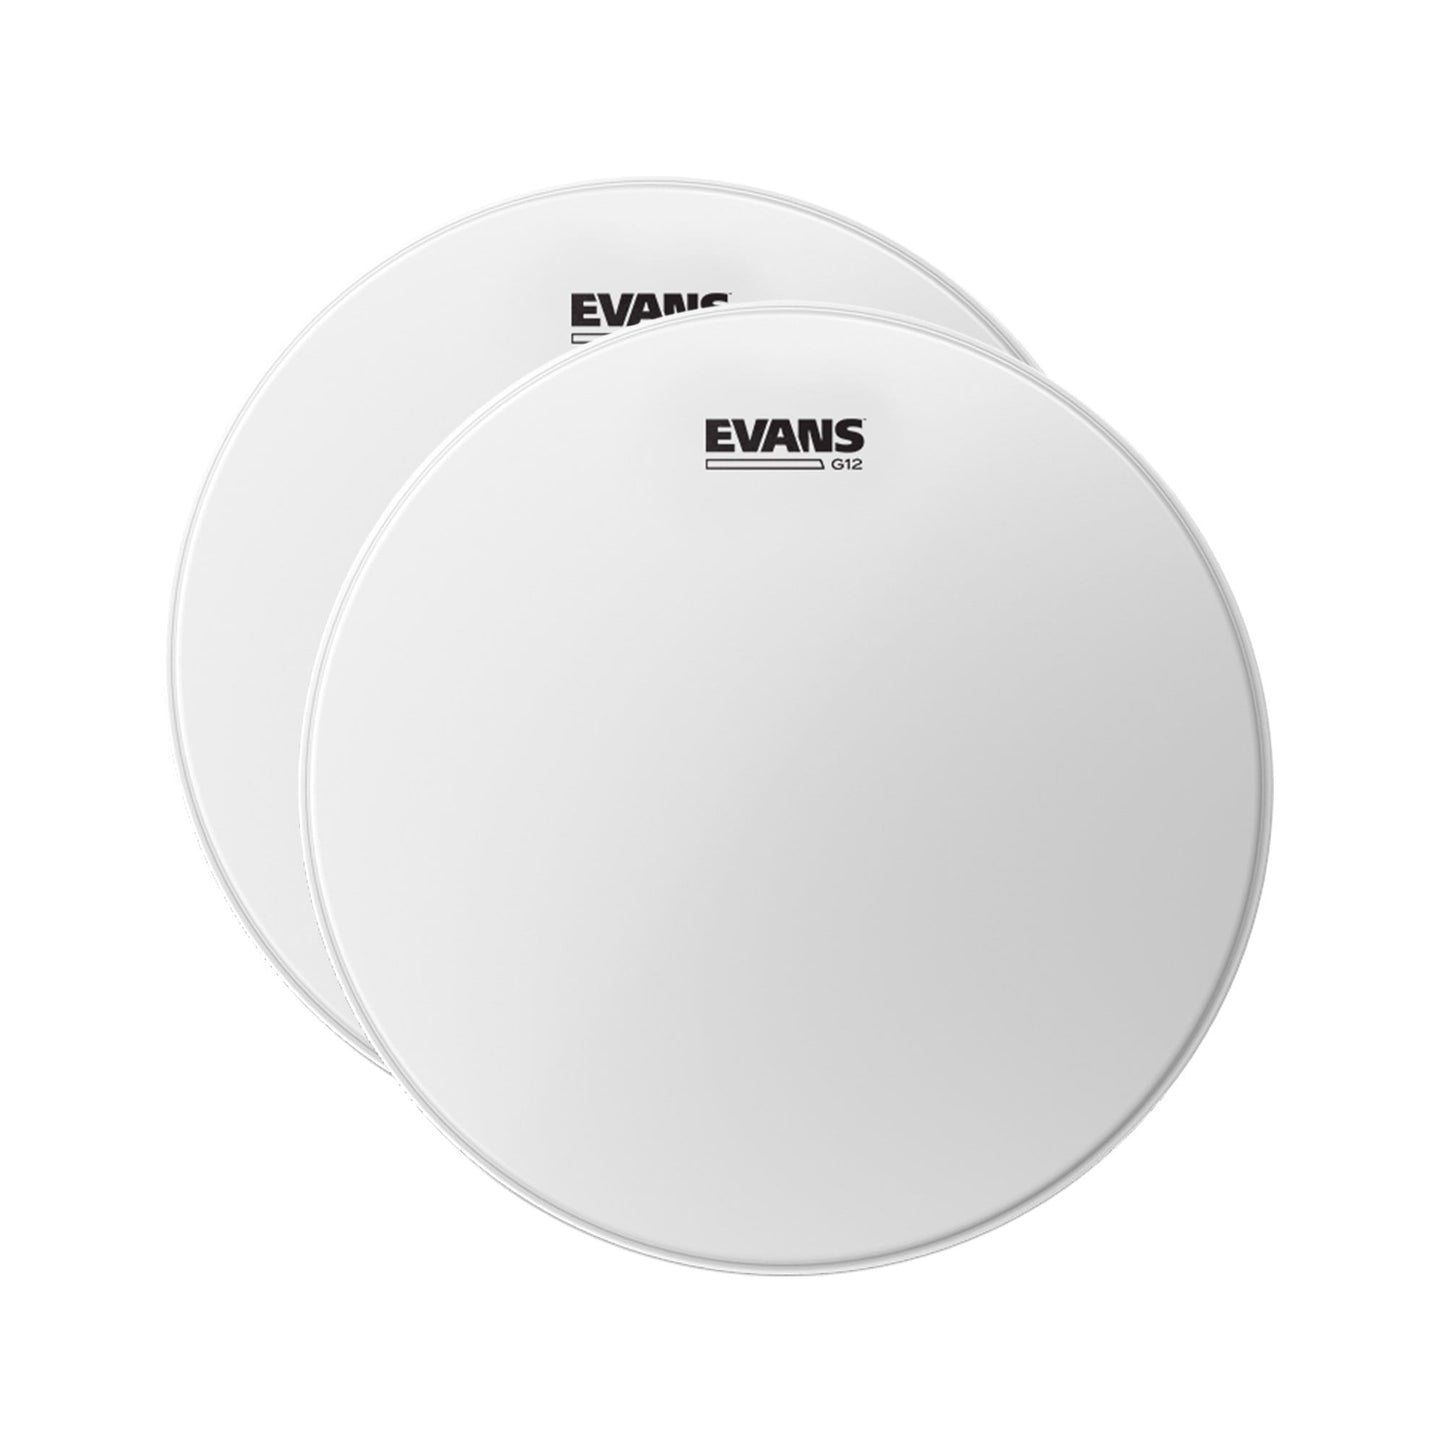 Evans 16" G12 Coated White Drum Head (2 Pack Bundle) Drums and Percussion / Parts and Accessories / Heads